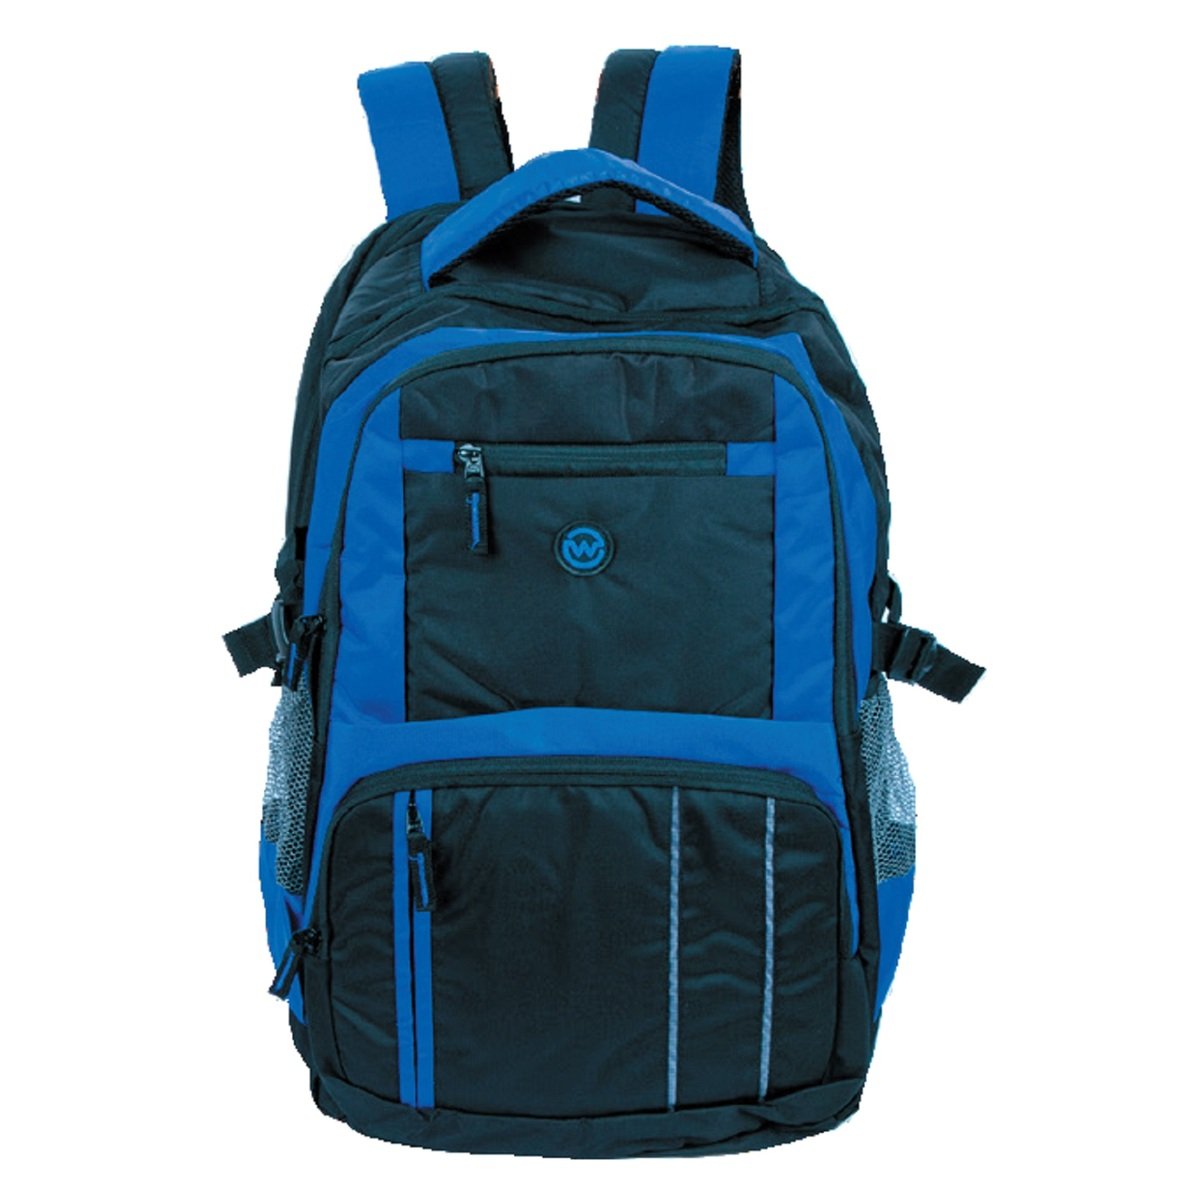 Wagon R Backpack HM9815 21” Assorted